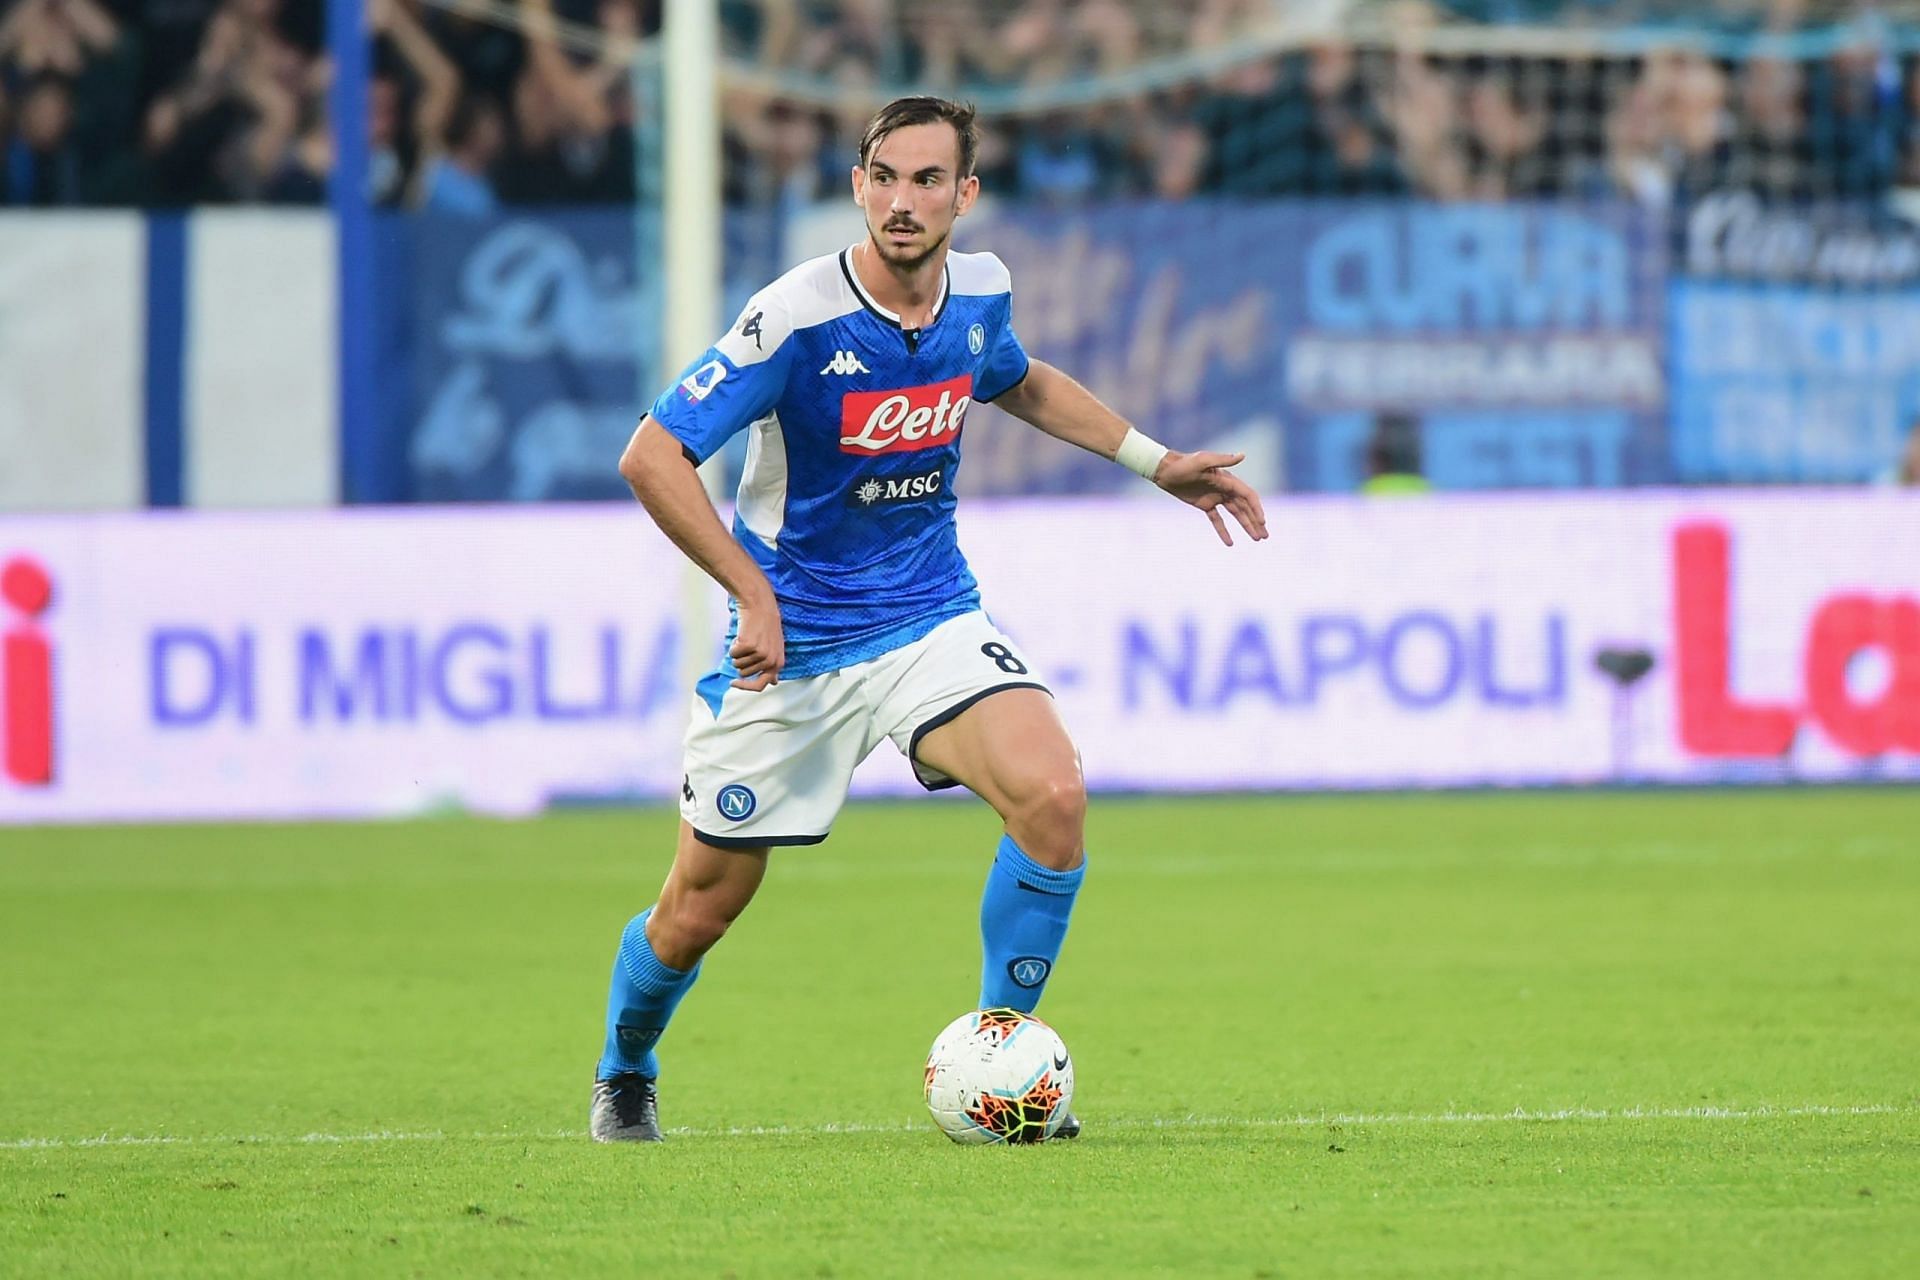 The Spaniard has started in every game in Napoli's unbeaten league run.